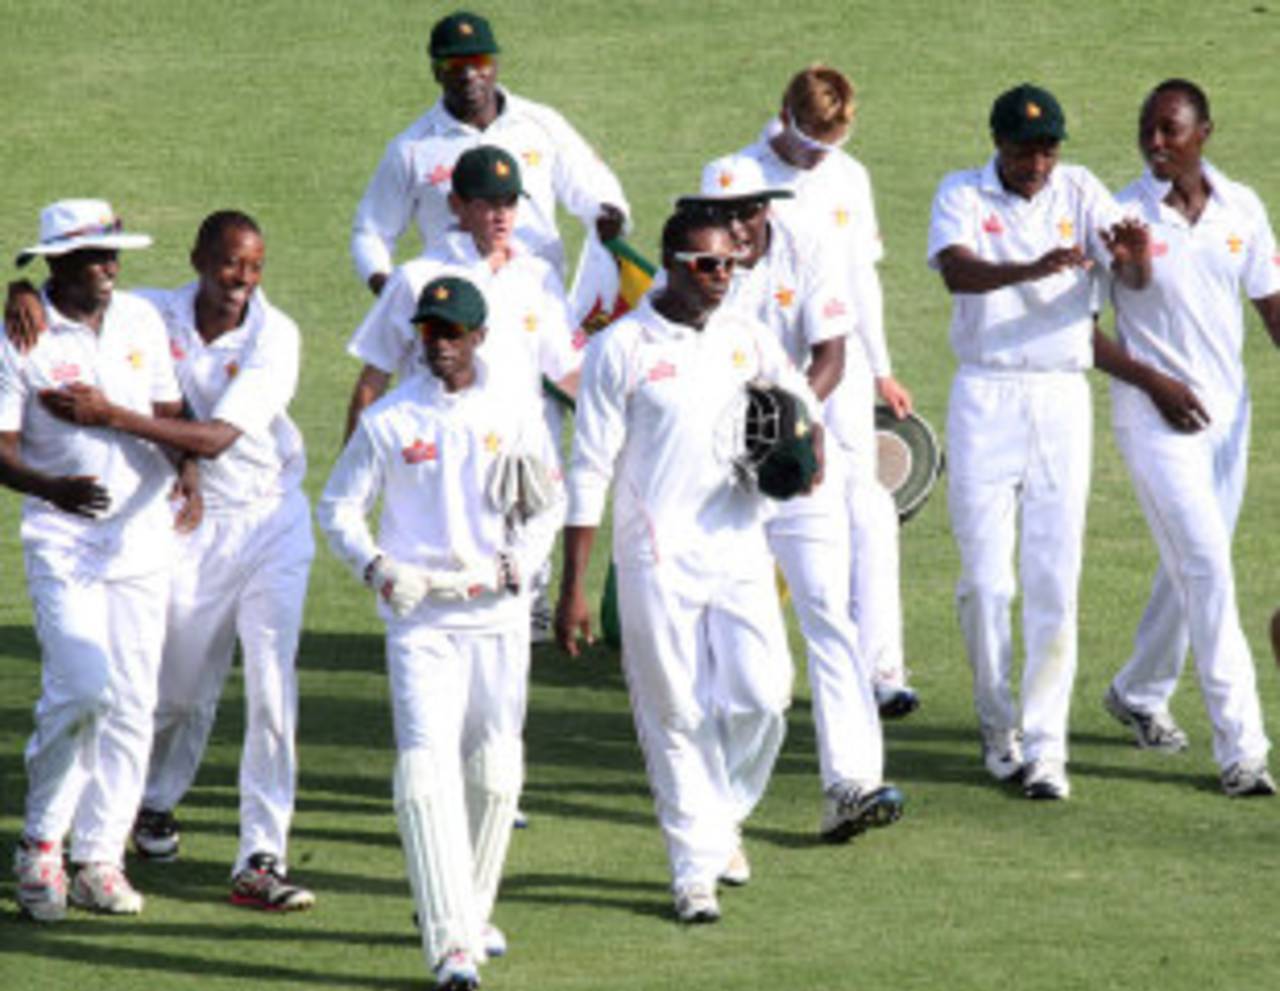 Zimbabwe walk off the pitch after their crushing victory, Zimbabwe v Bangladesh, 1st Test, 4th day, Harare, April 20, 2013